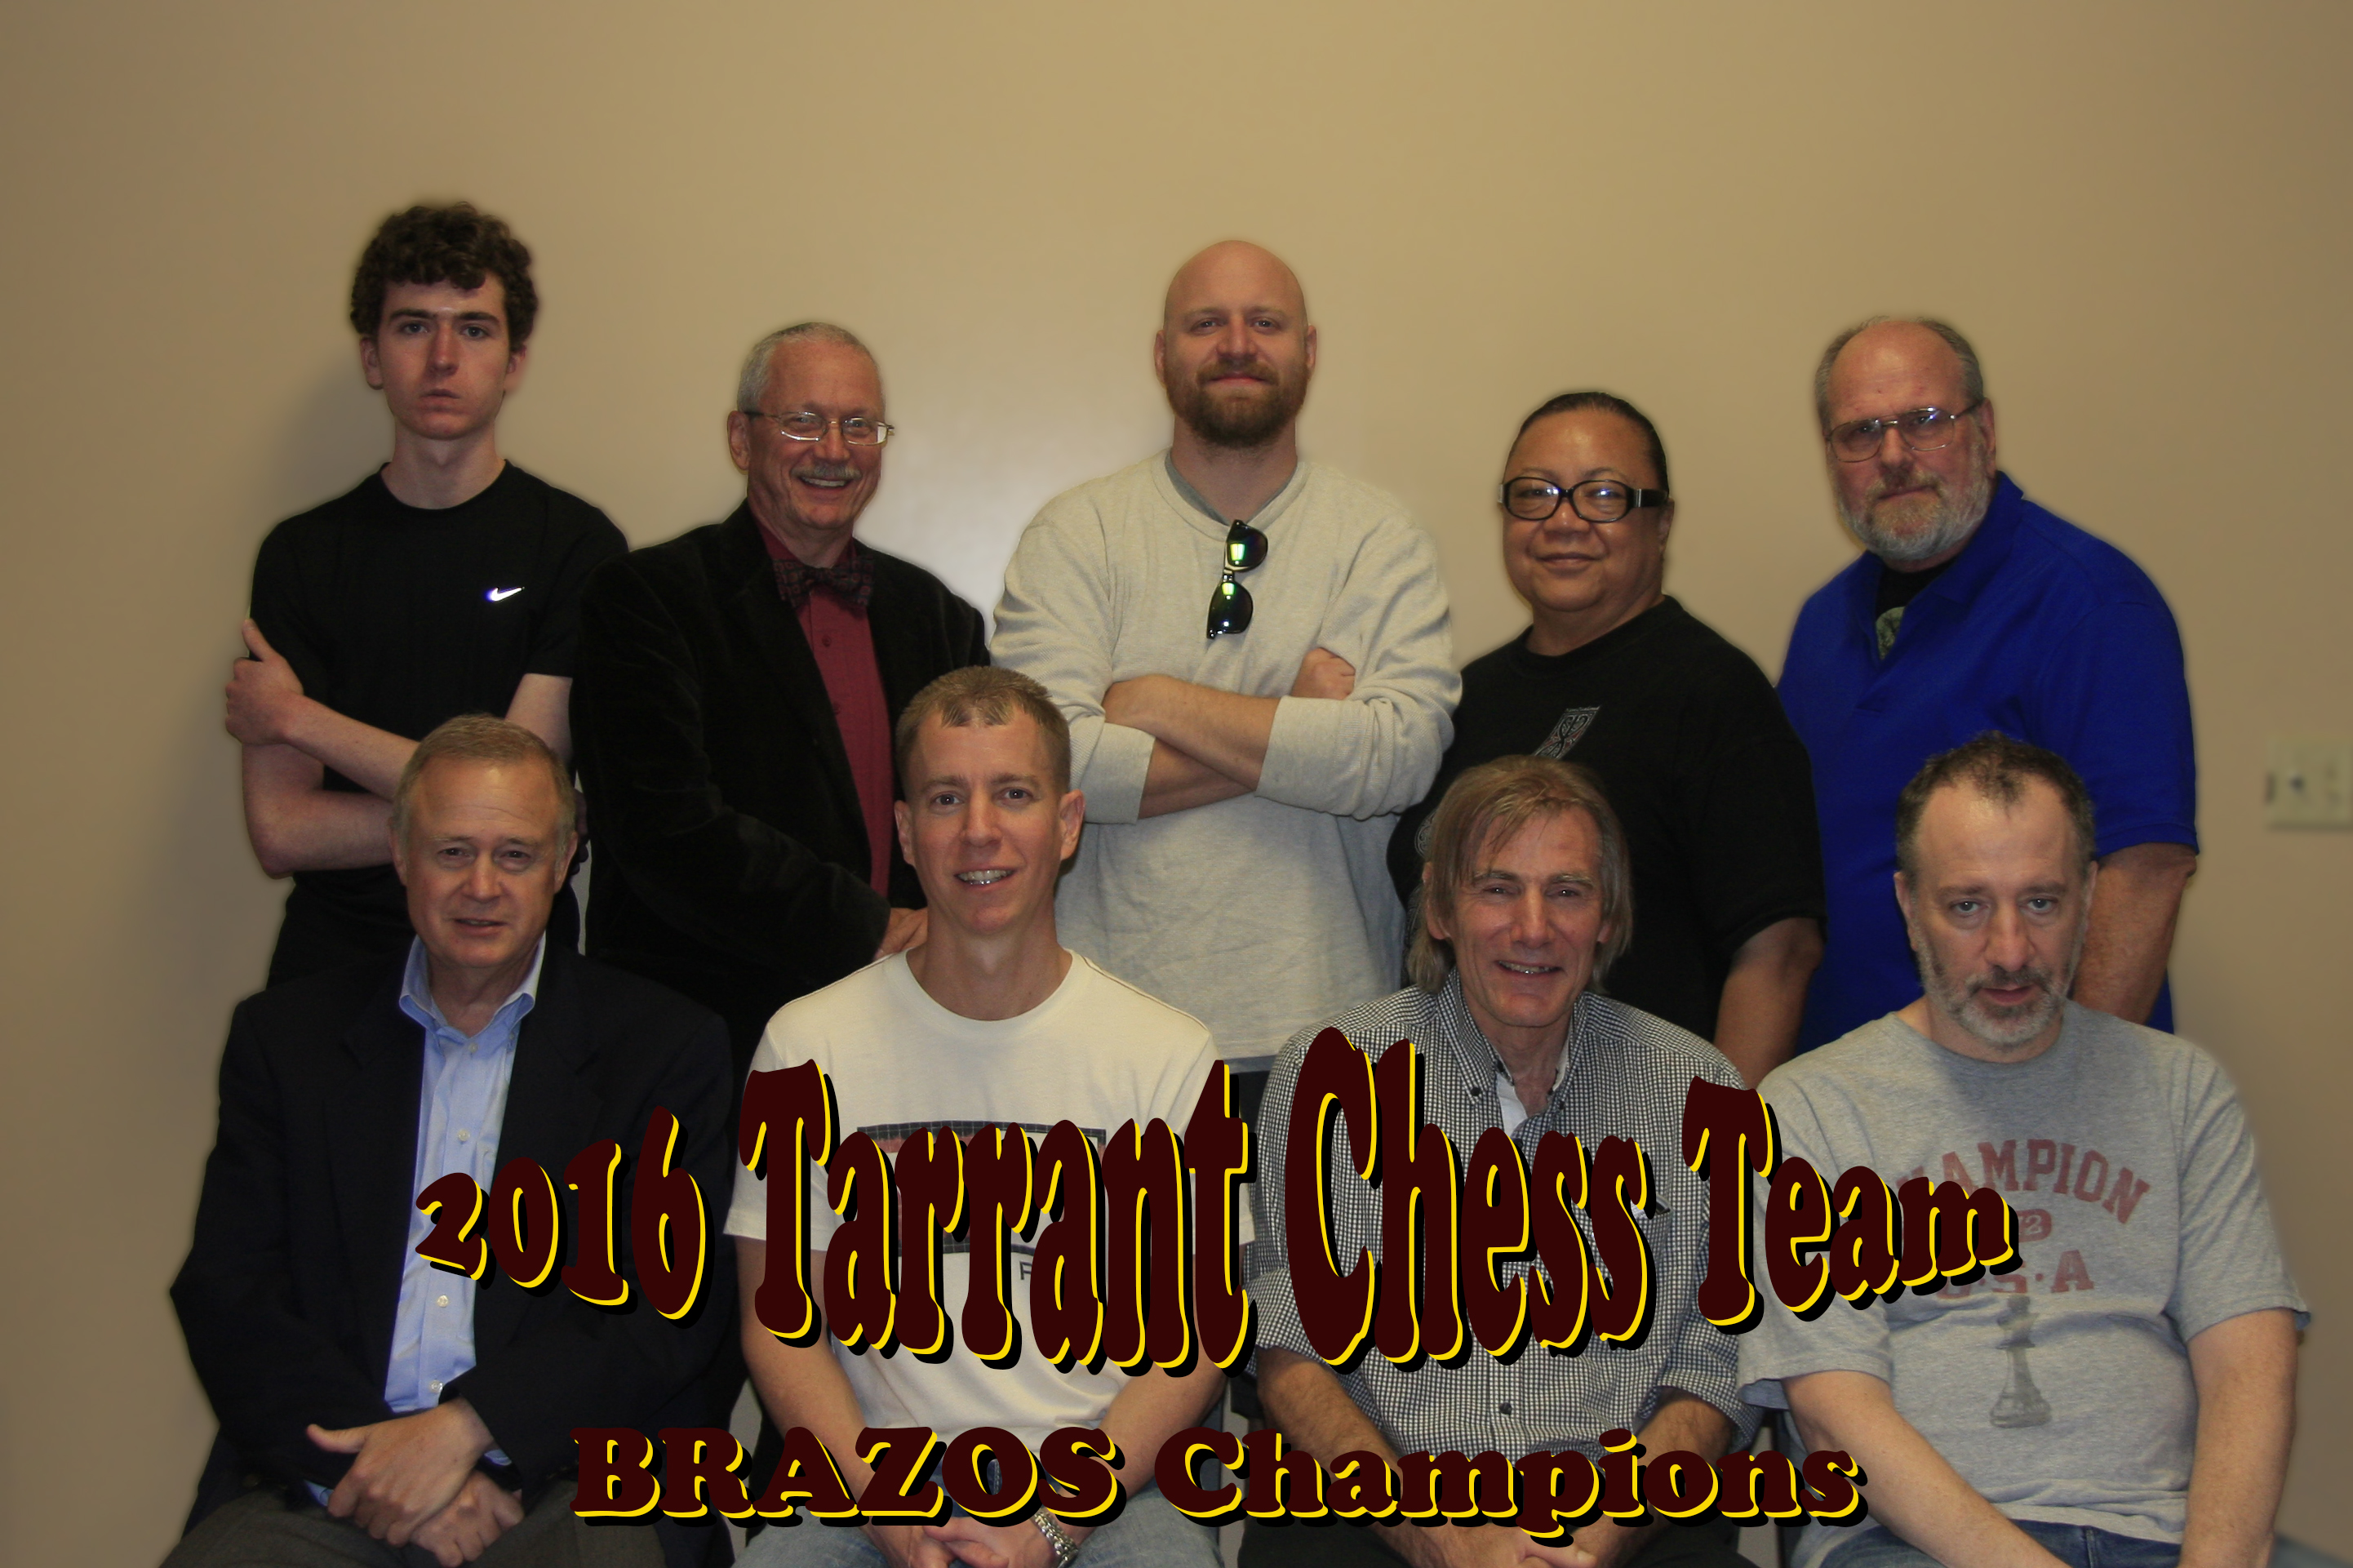 2016 Tarrant Chess Team photo and graphics by Jim Hollingsworth